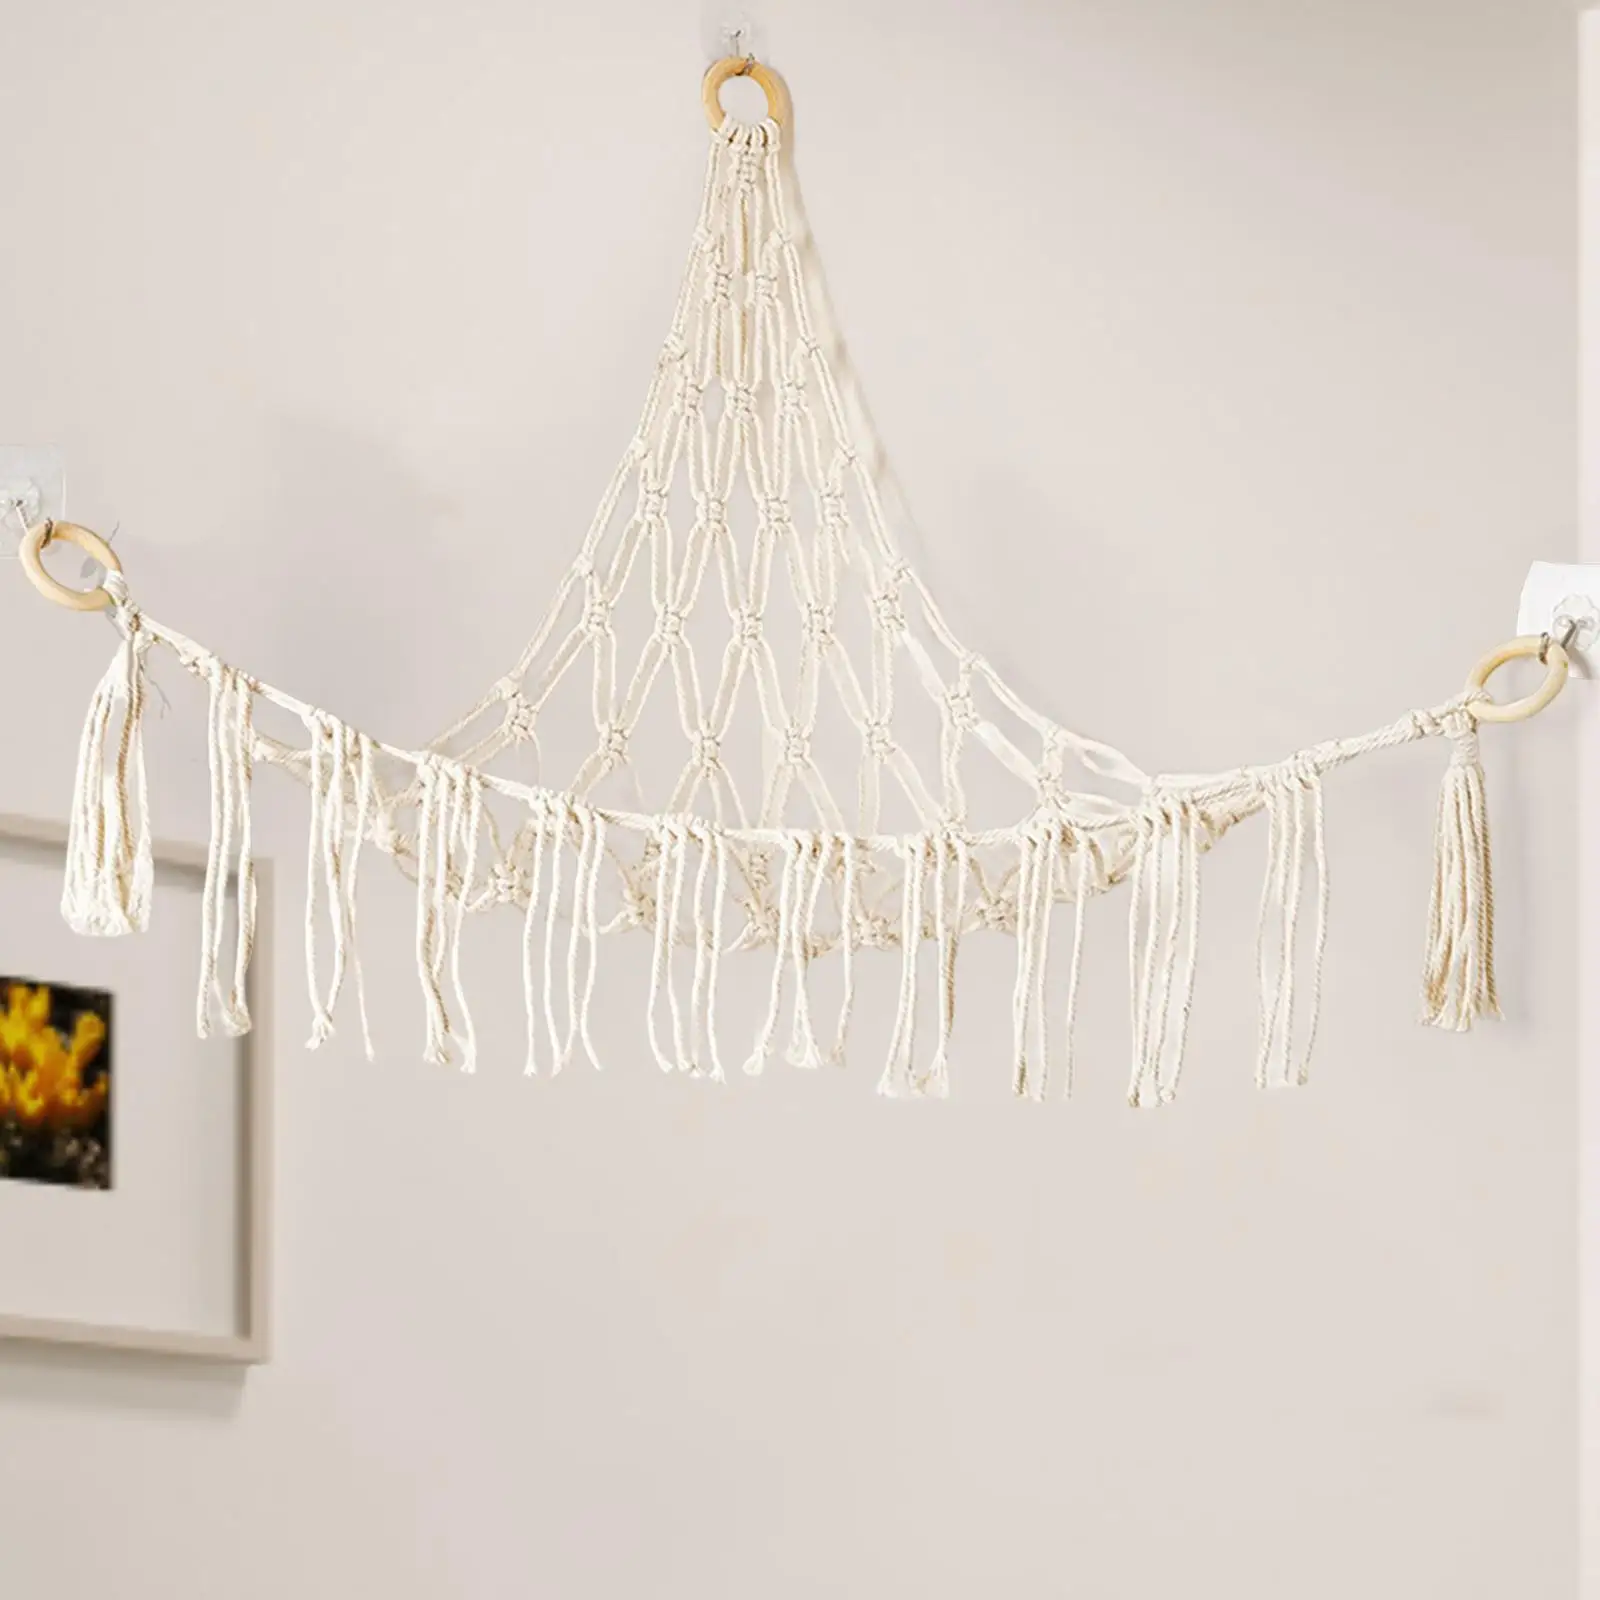 Toy Hammock Holder Hanging Macrame Stuff Display Soft Stuffed Toy Storage Net for Home Bedroom Ornaments Decor Holiday Gifts